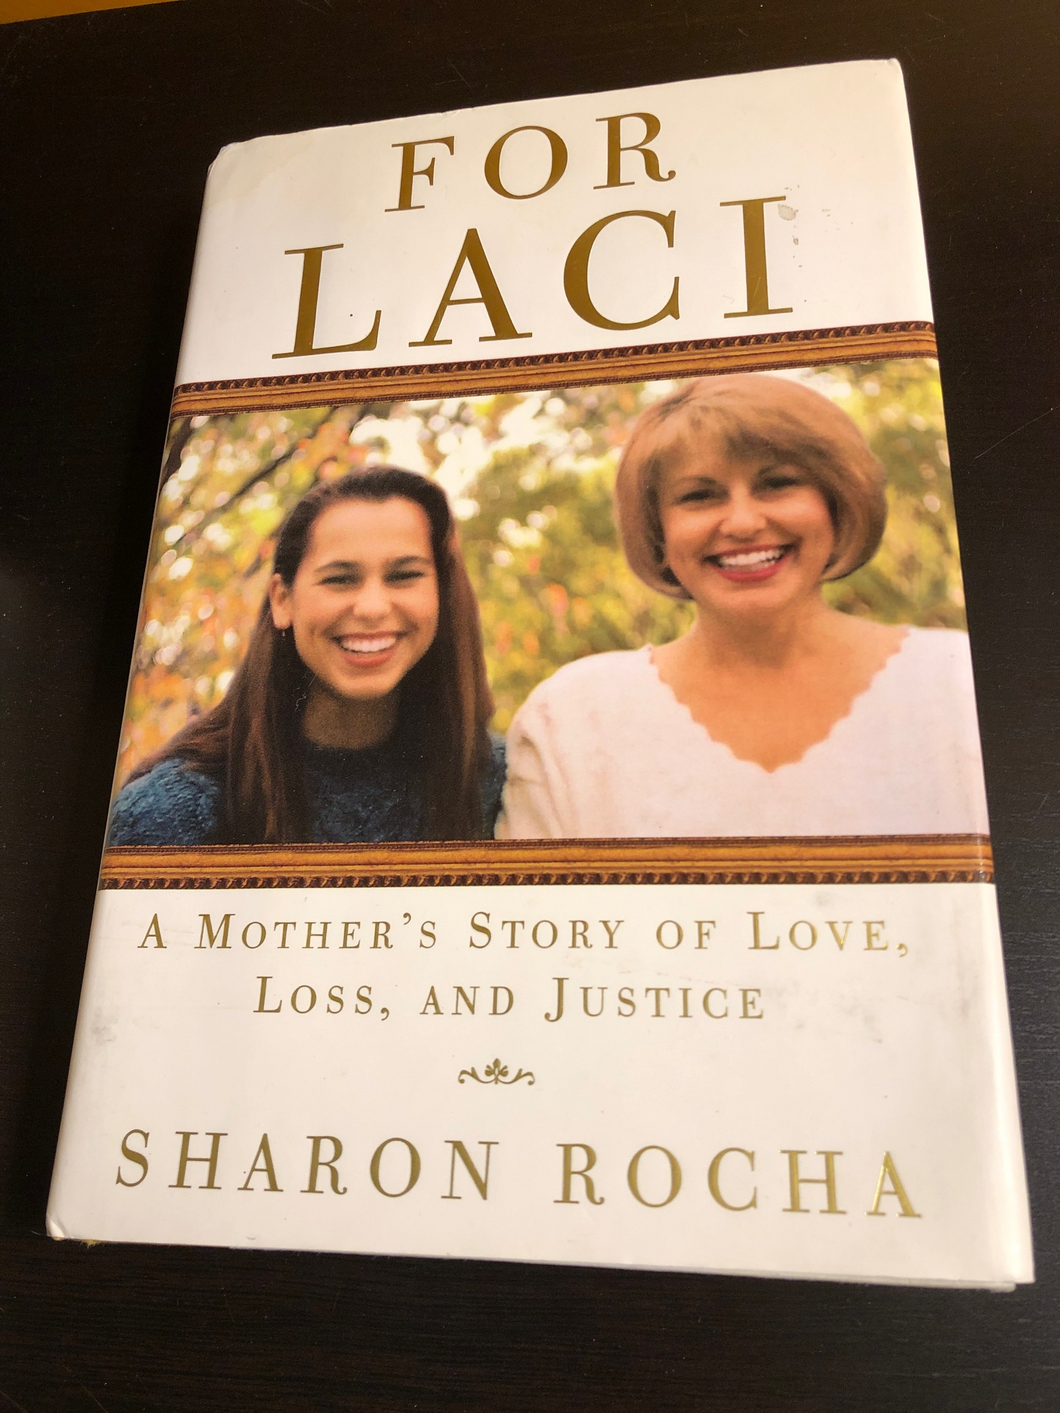 For Laci: A Mother's Story of Love, Loss, and Justice